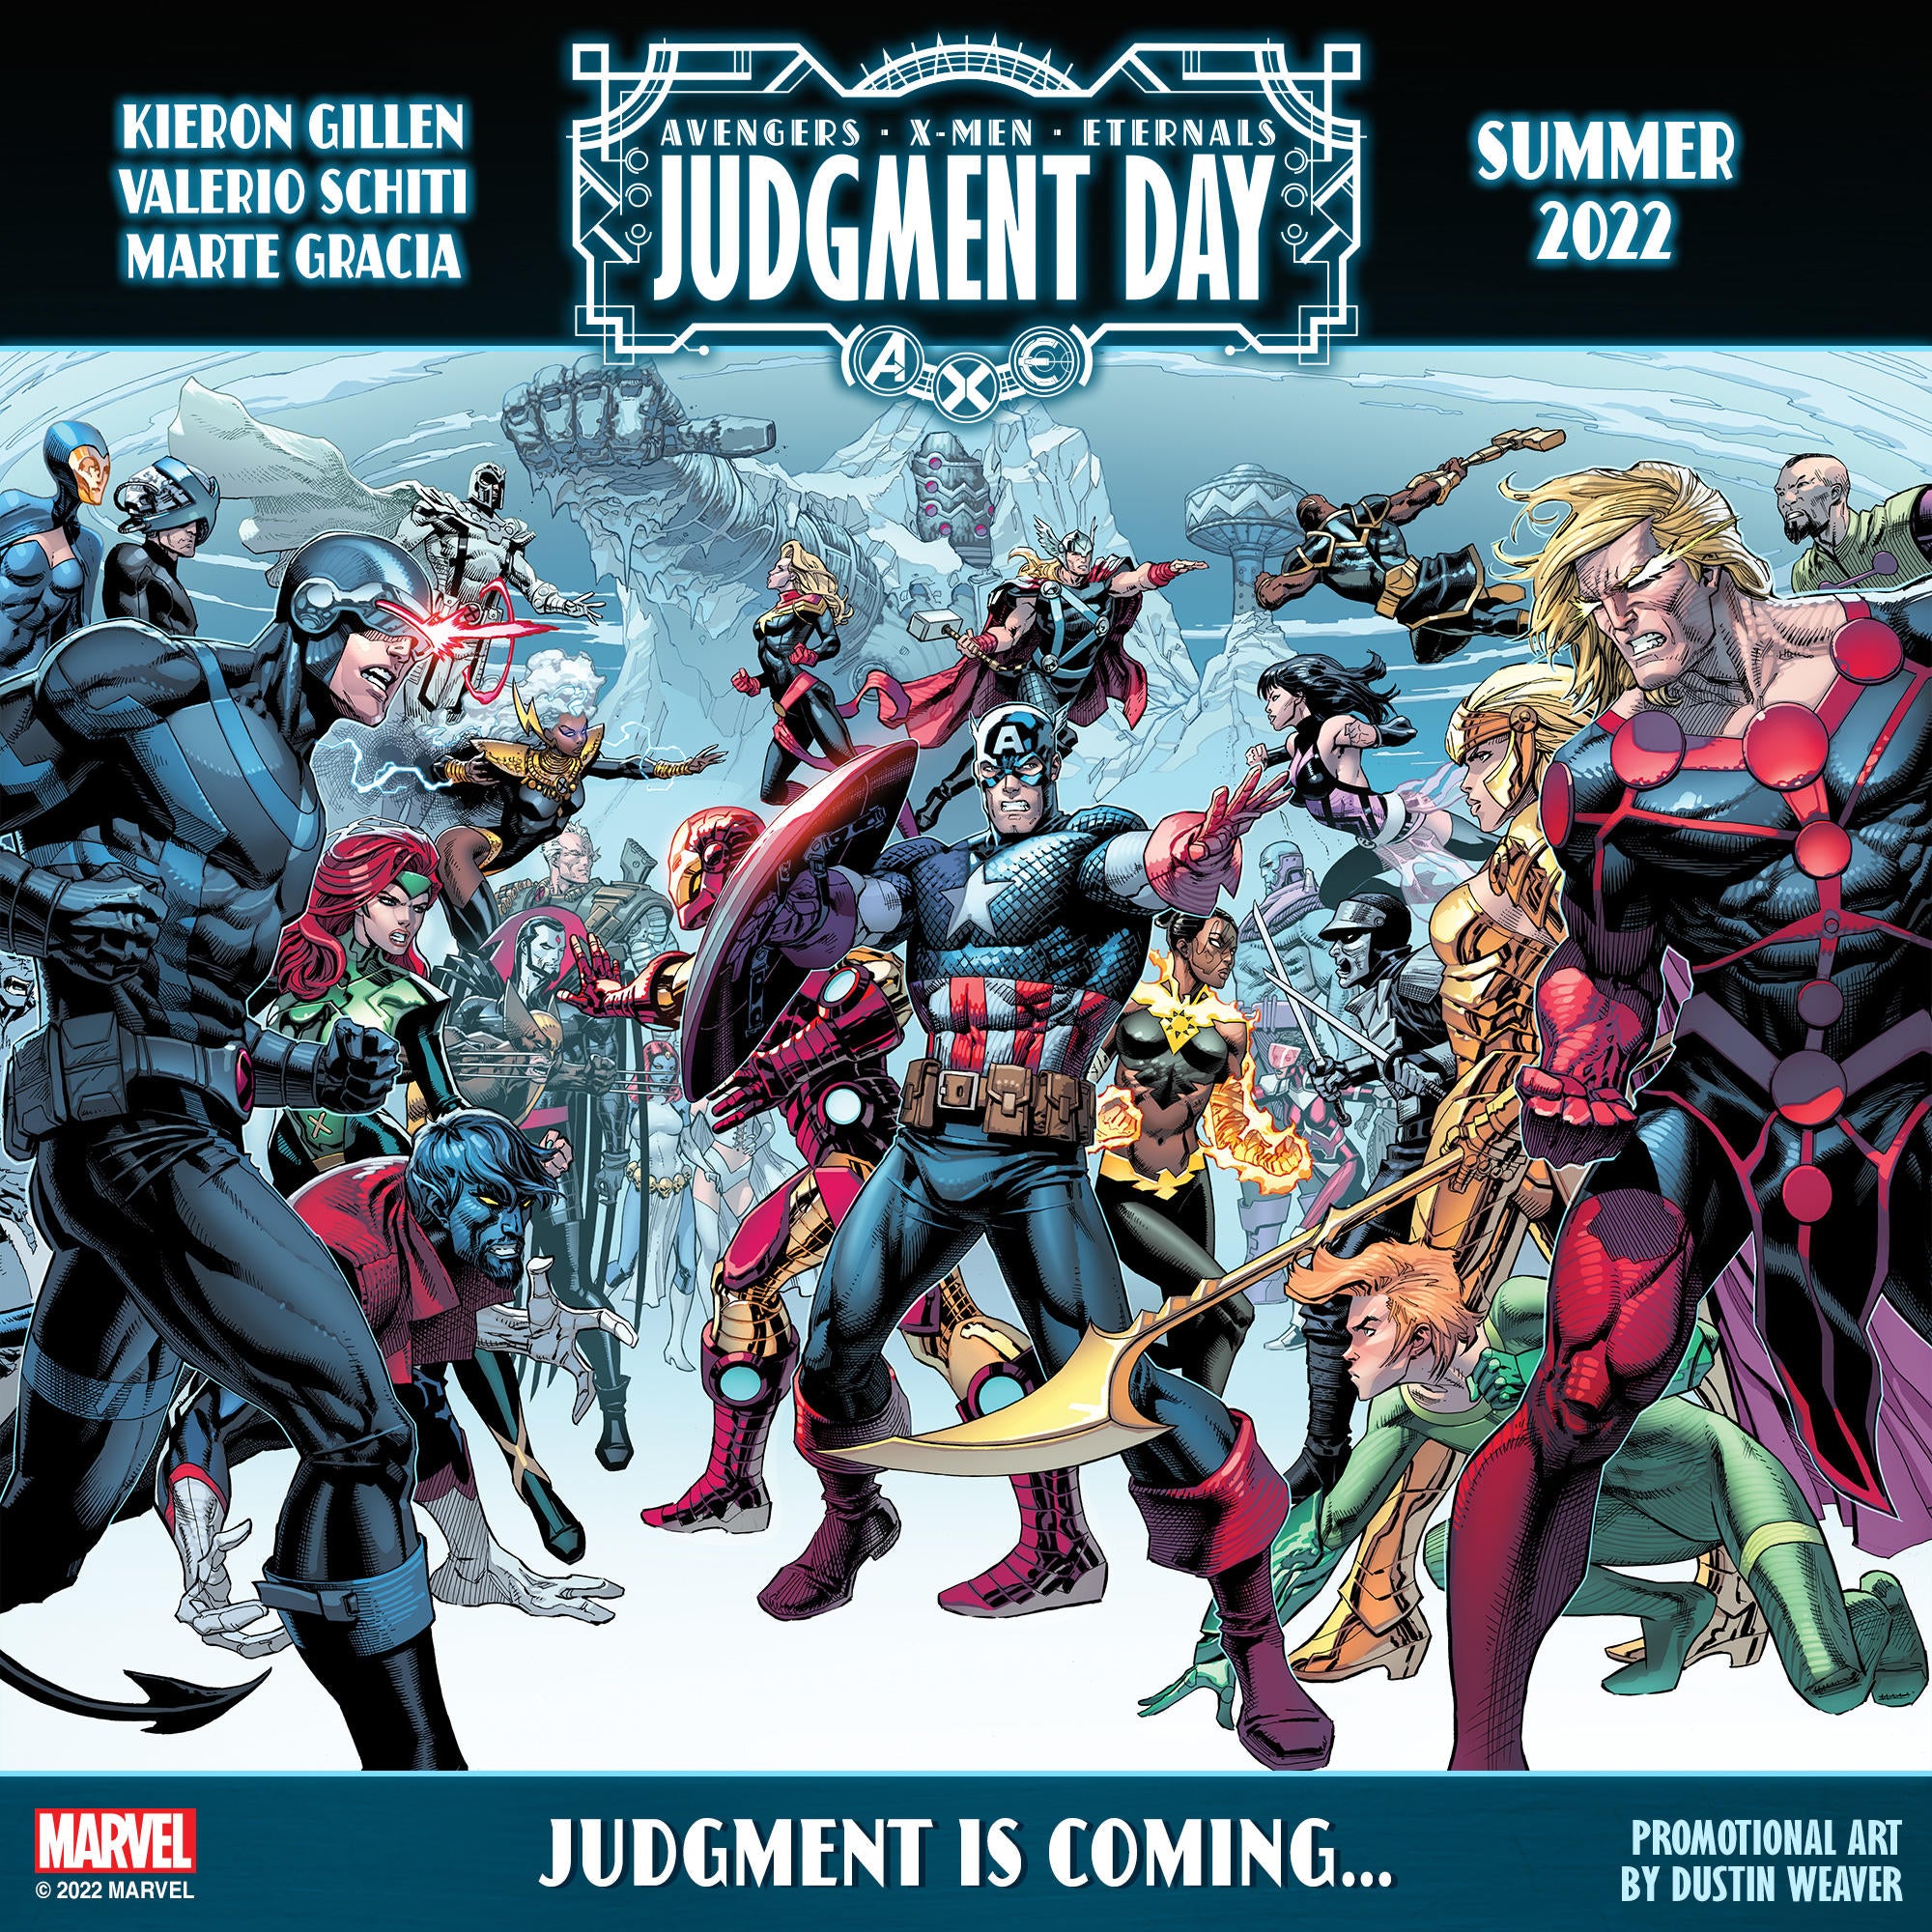 Marvel Officially Announces Avengers Eternals X Men Crossover Judgment Day